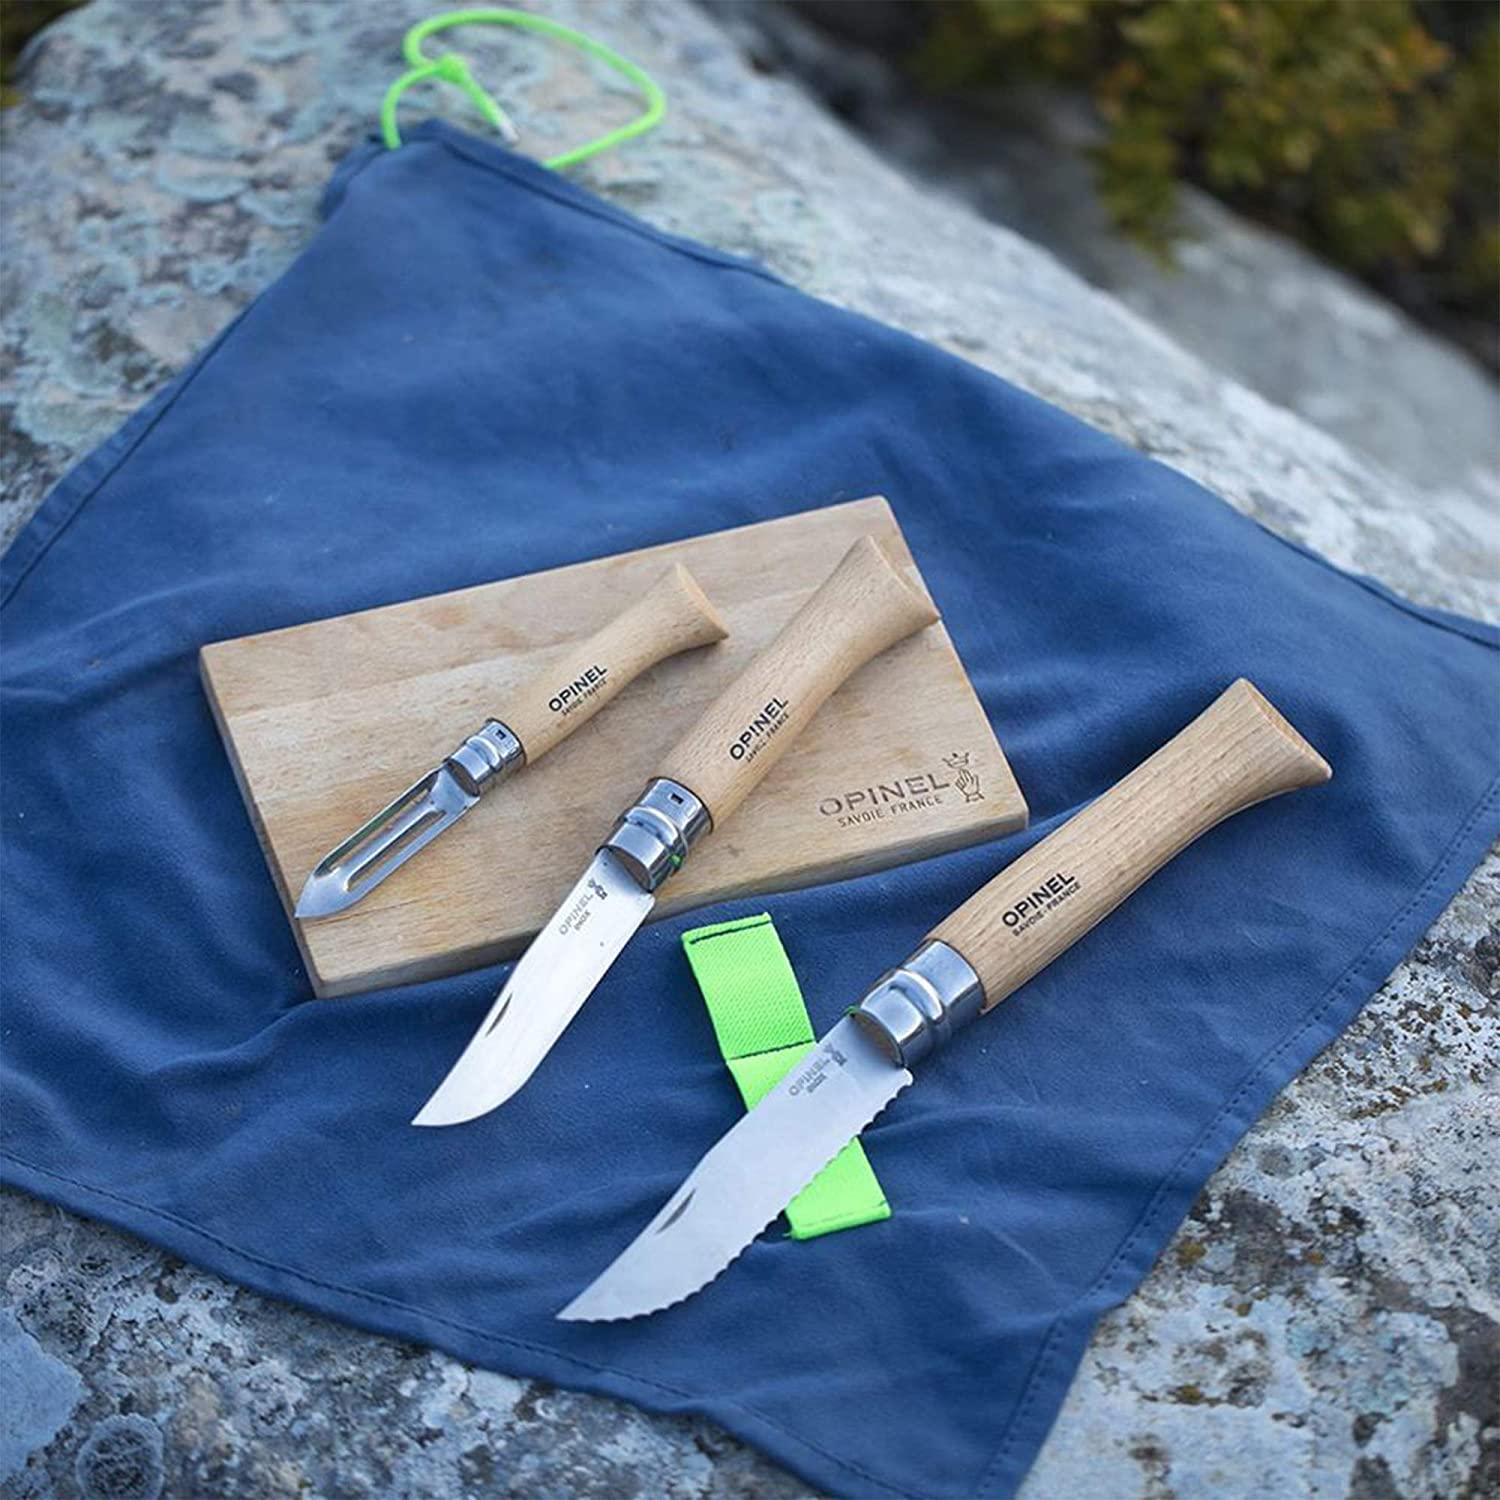 Opinel Nomad Camping Kitchen Utensil Kit, Includes No.12 Serrated Knife,  No. 10 Corkscrew Knife, No. 6 Peeler, Cutting Board